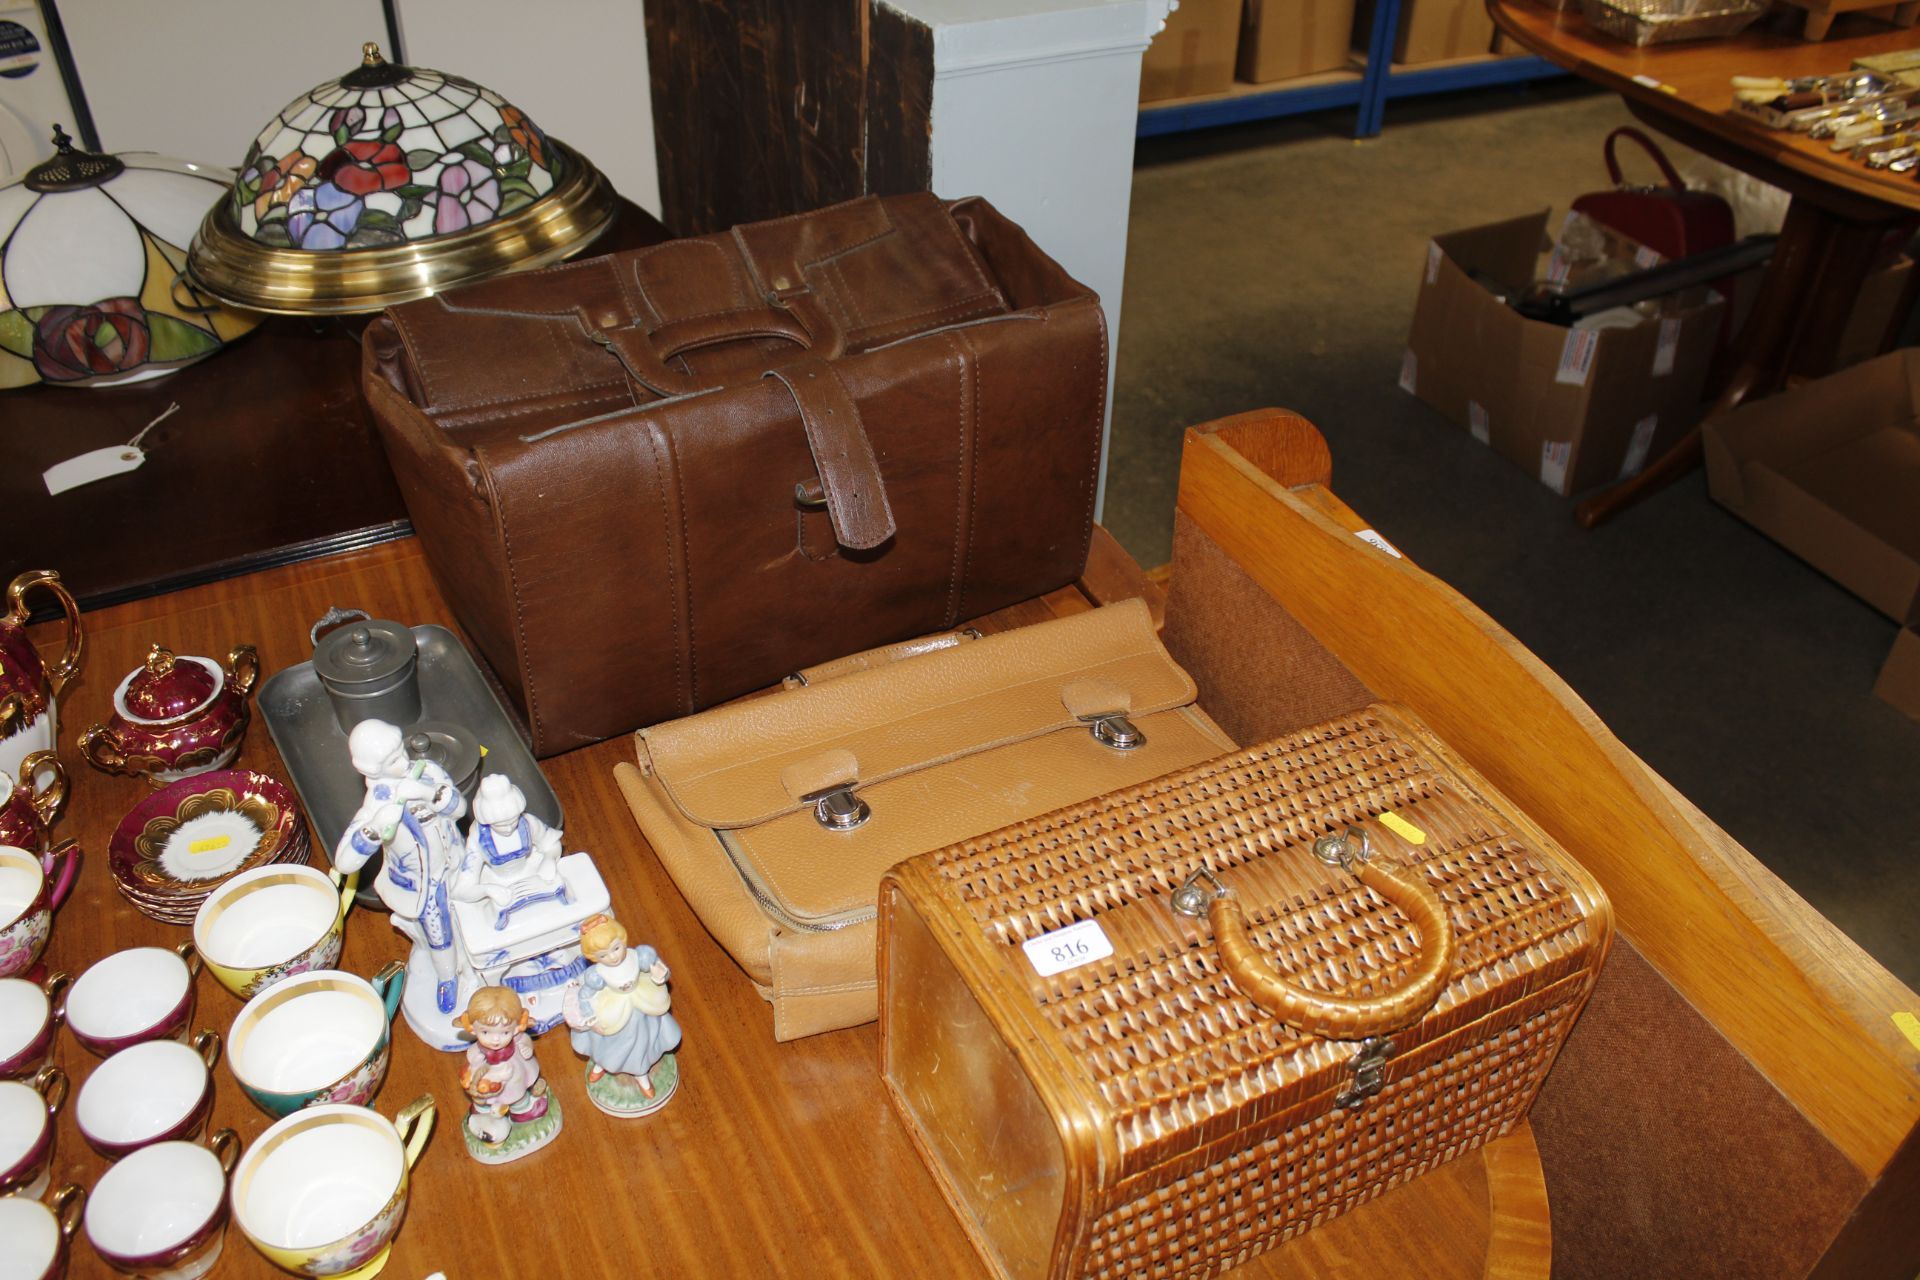 A wicker basket and two bags